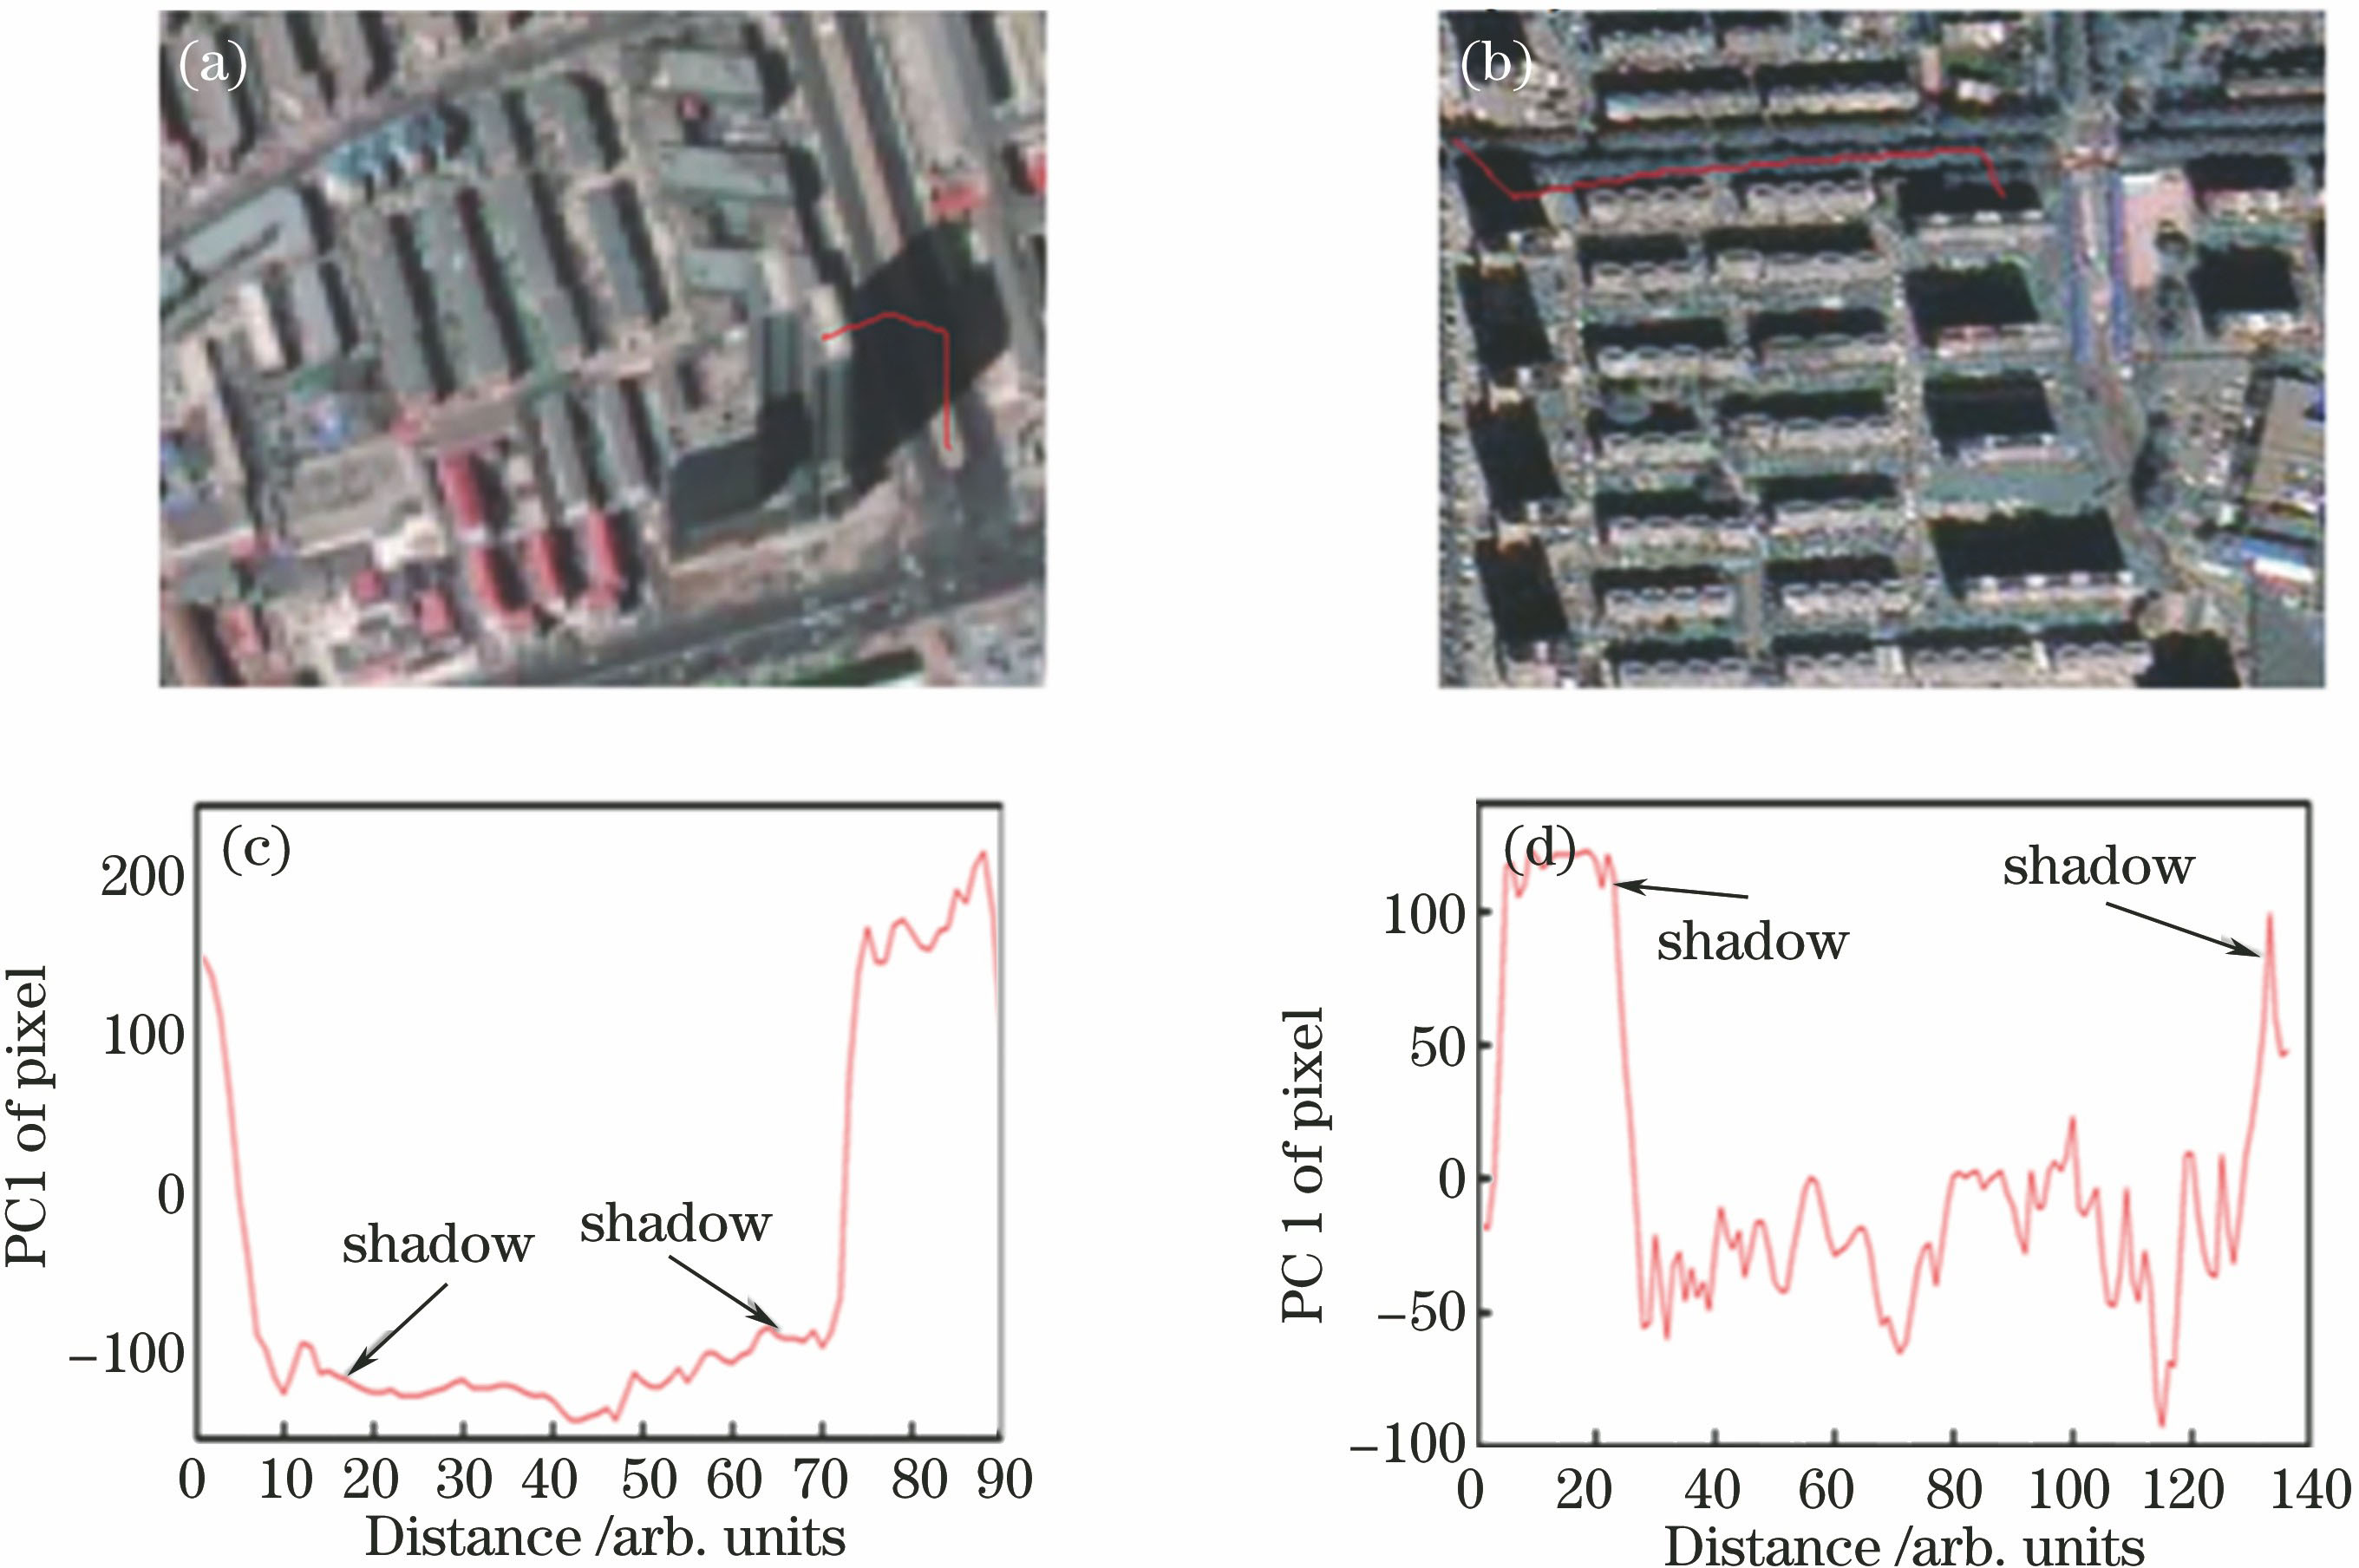 PC1 contrast diagrams of shadow area. (a) Light color surface feature area near Tianjin tower; (b) deep color surface feature area in north Changchun; (c) PC1 of area marked by red line in Fig.1(a); (d) PC1 of area marked by red line in Fig.1(b)